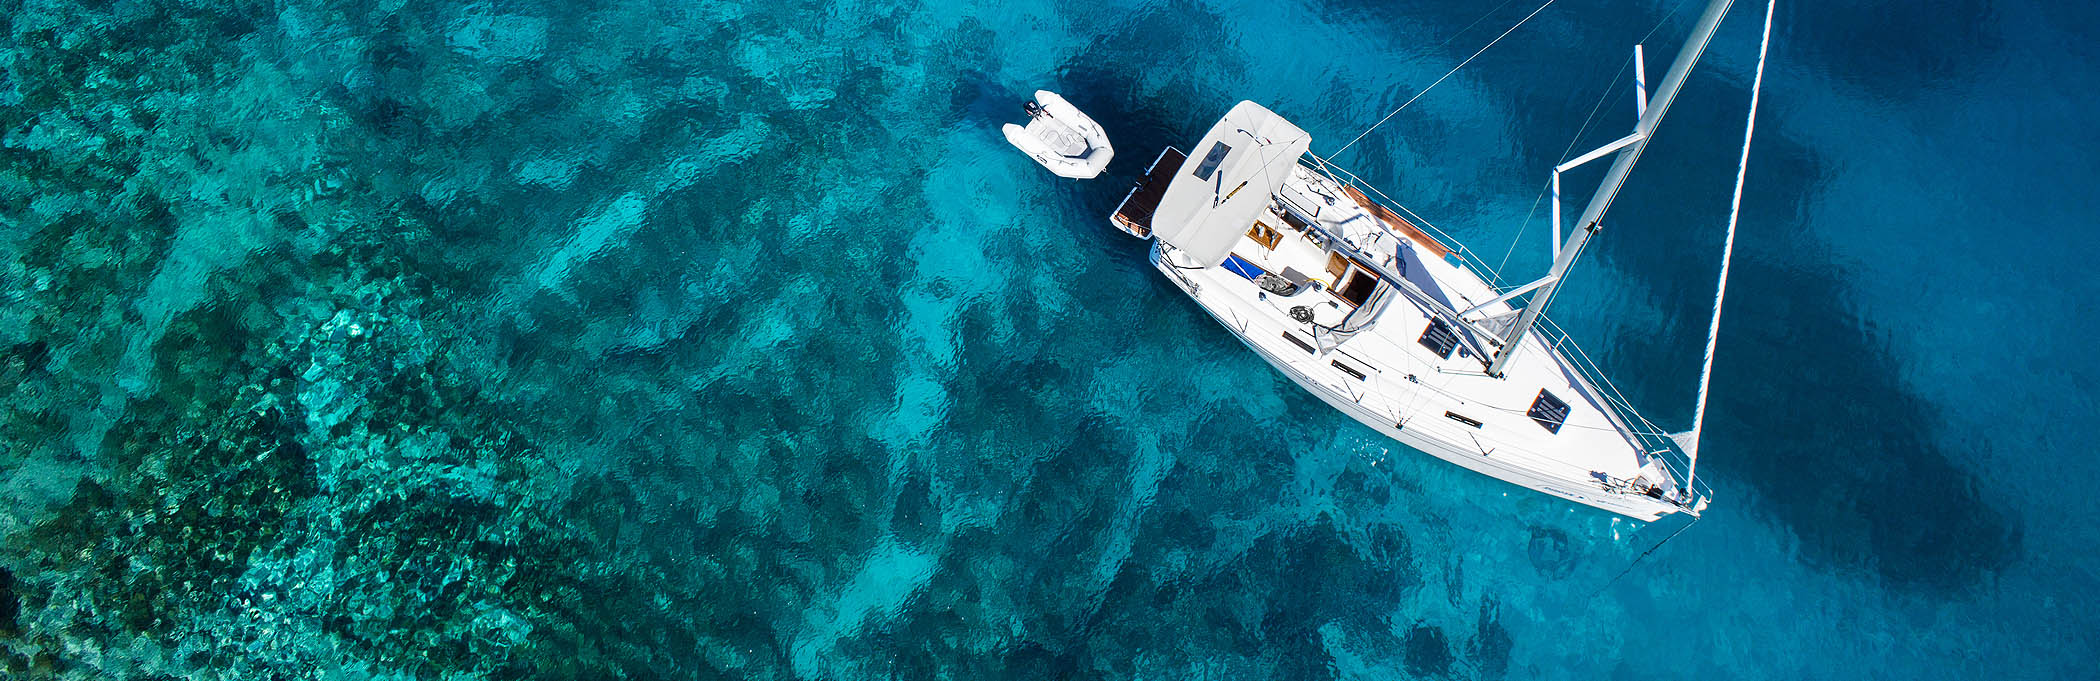 Charter Yachts Australia Header - Sailing The Great Barrier Reef Queensland